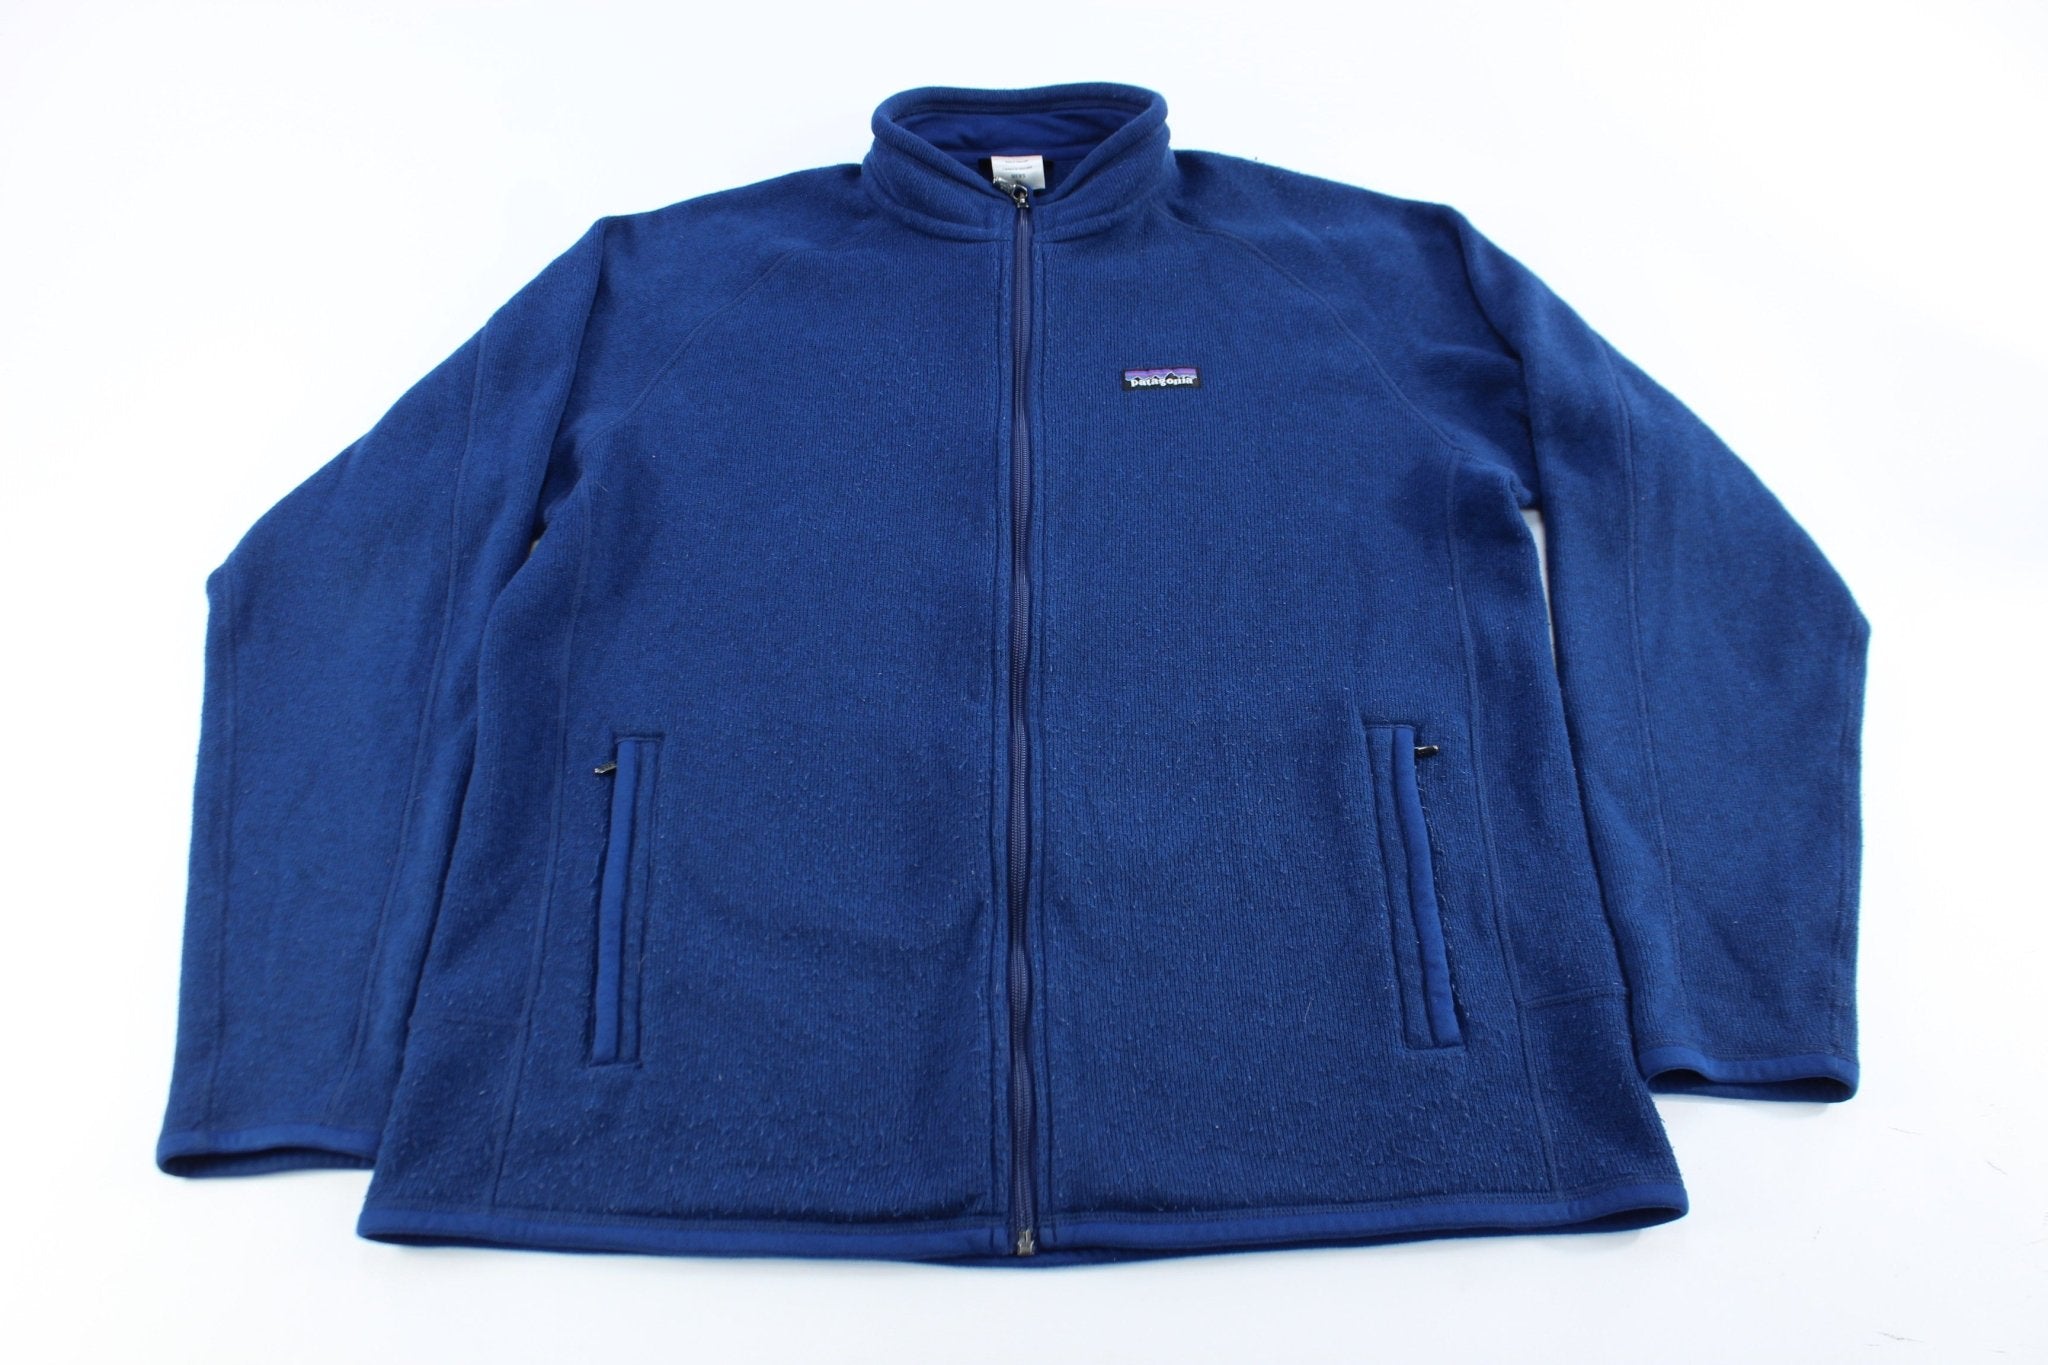 Patagonia Logo Patch Blue Zip Up Jacket - ThriftedThreads.com